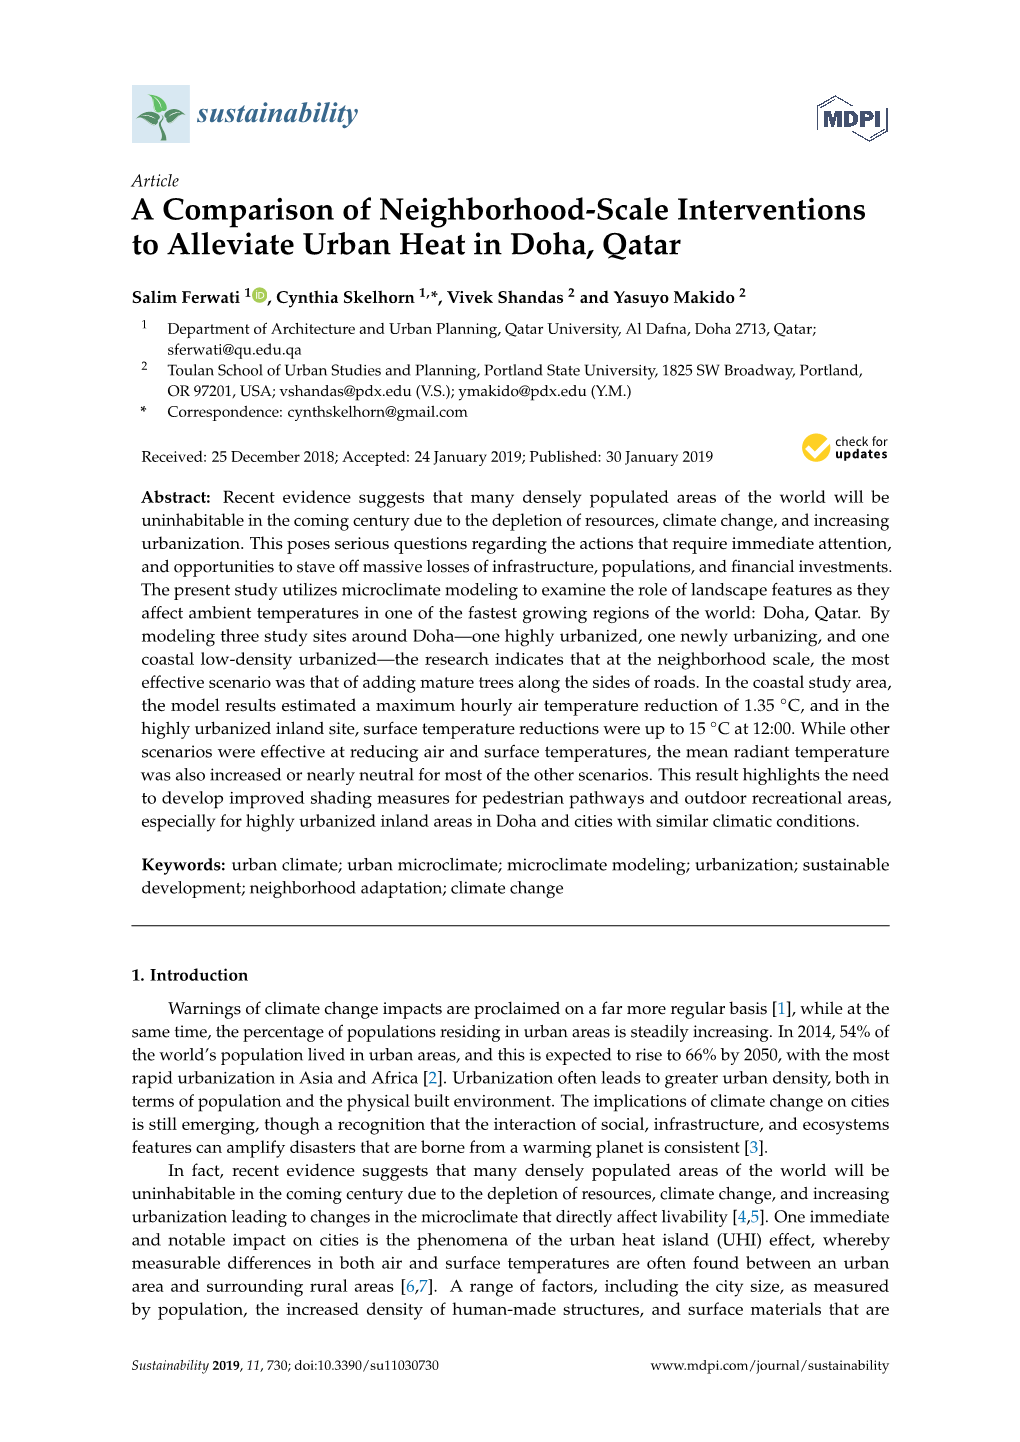 A Comparison of Neighborhood-Scale Interventions to Alleviate Urban Heat in Doha, Qatar